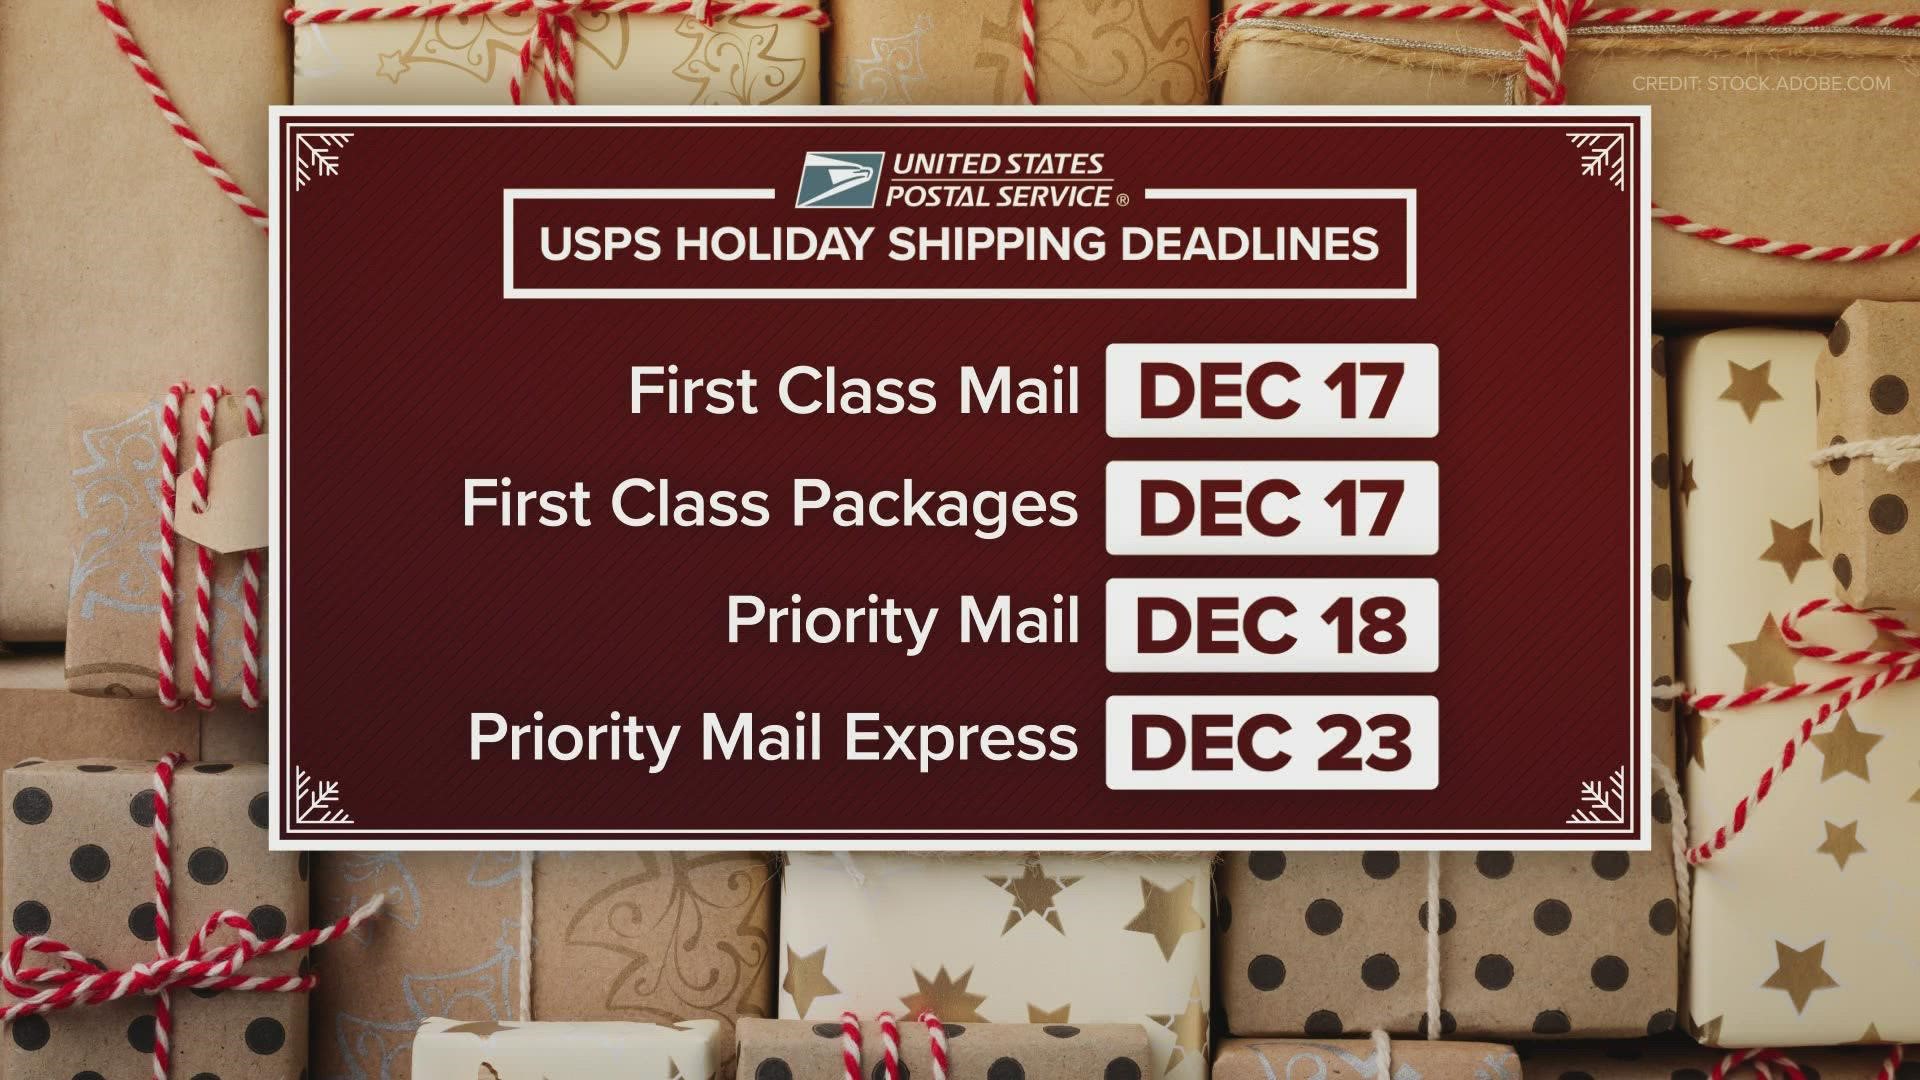 The Southern Maine USPS facility is preparing for holiday shipping as last year's delayed times due to the COVID pandemic